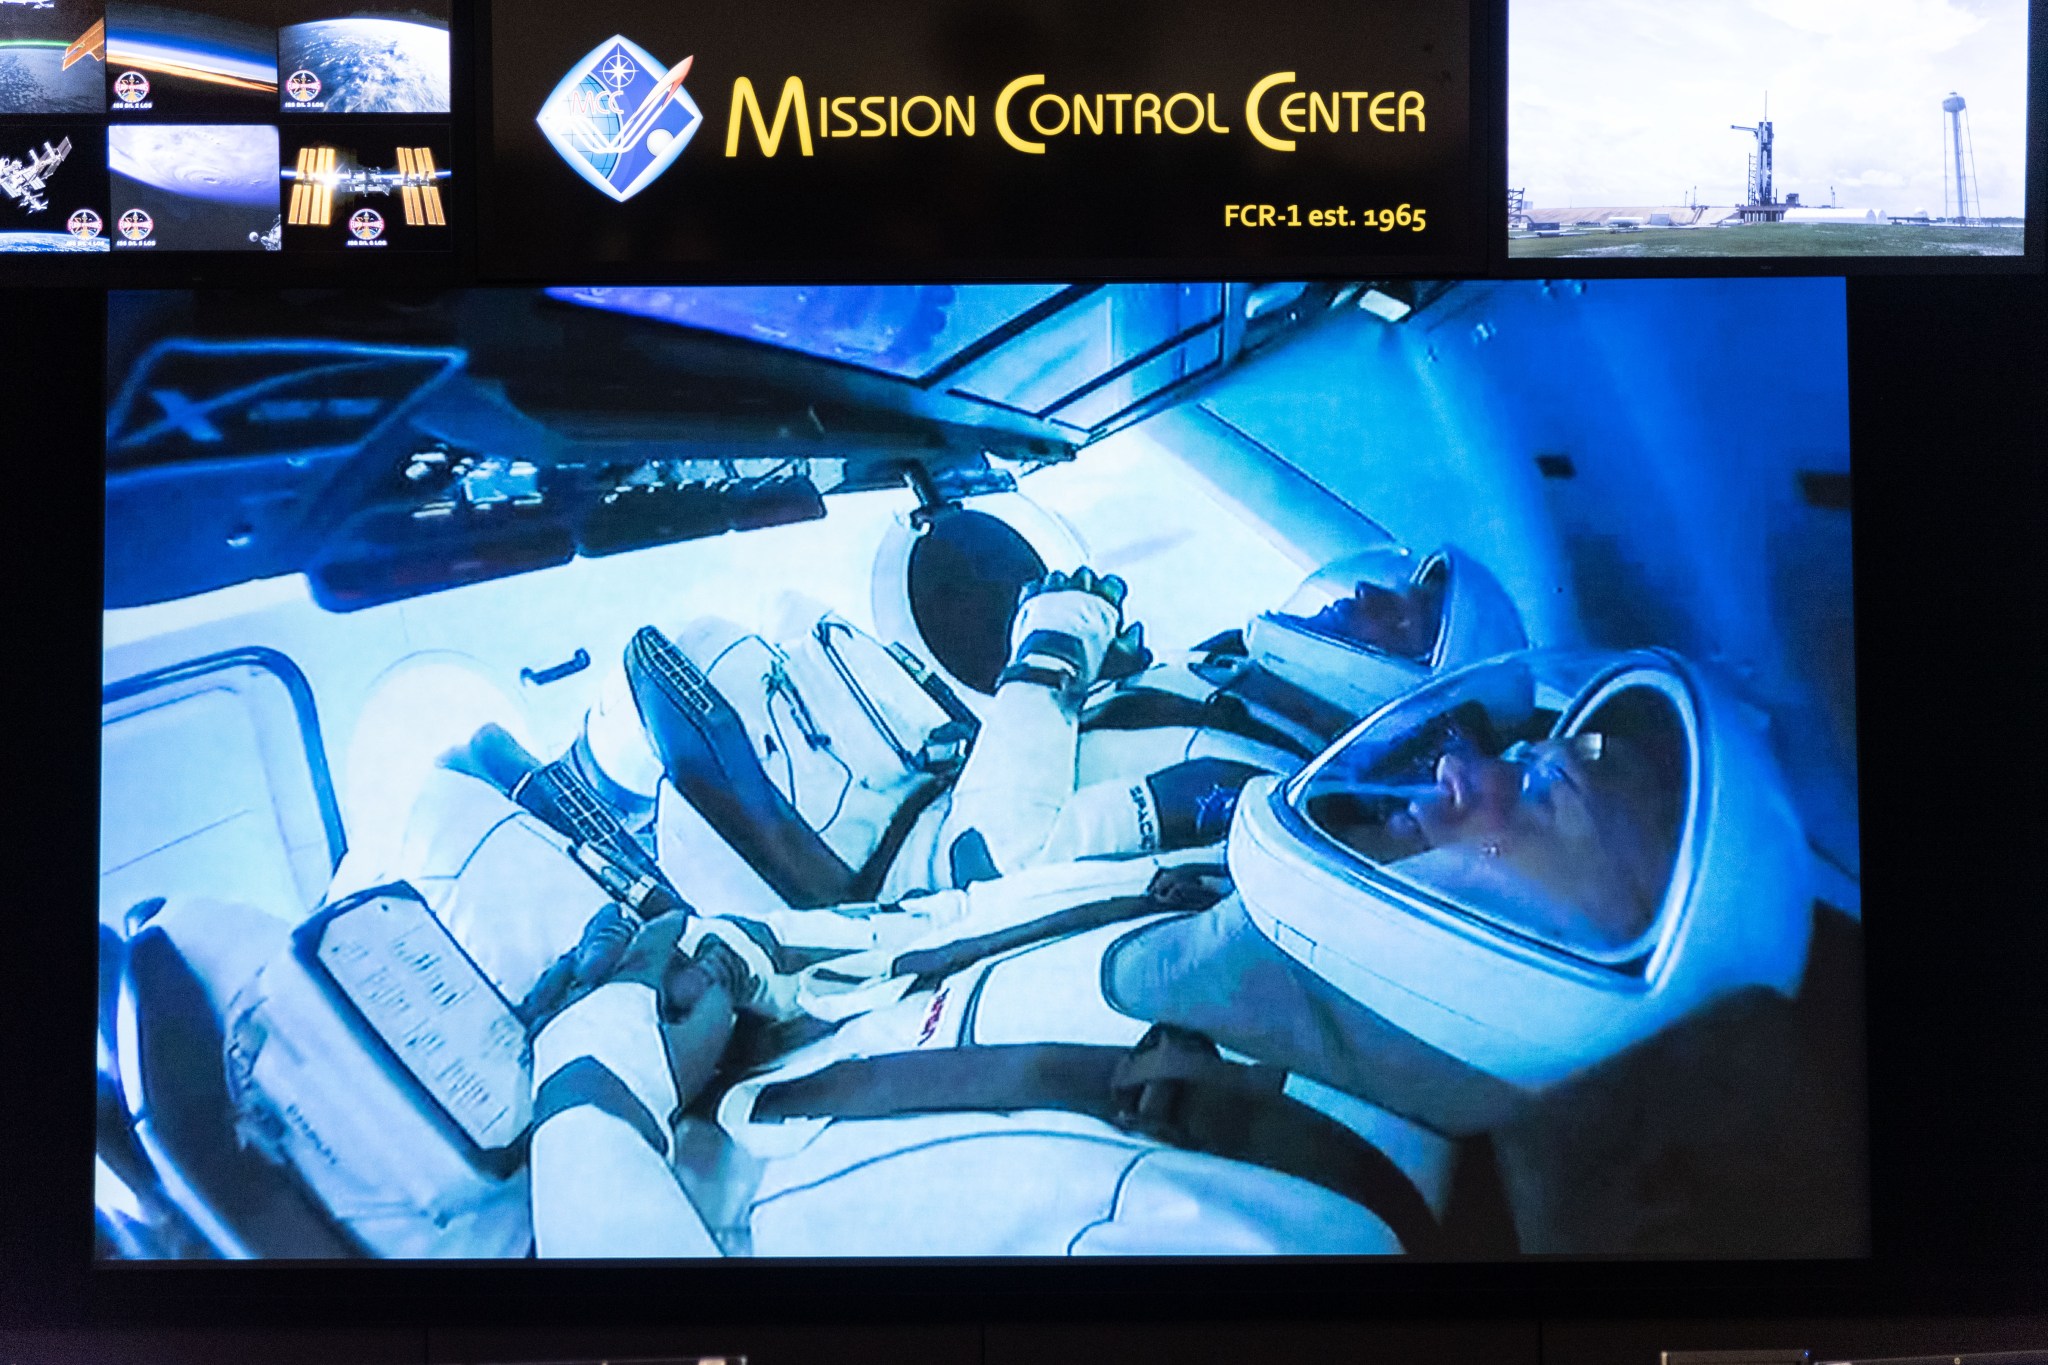 Coverage of Expedition 63 flight control team with Flight Director Zebulon Scoville during SpaceX DM-2 launch in Mission Control